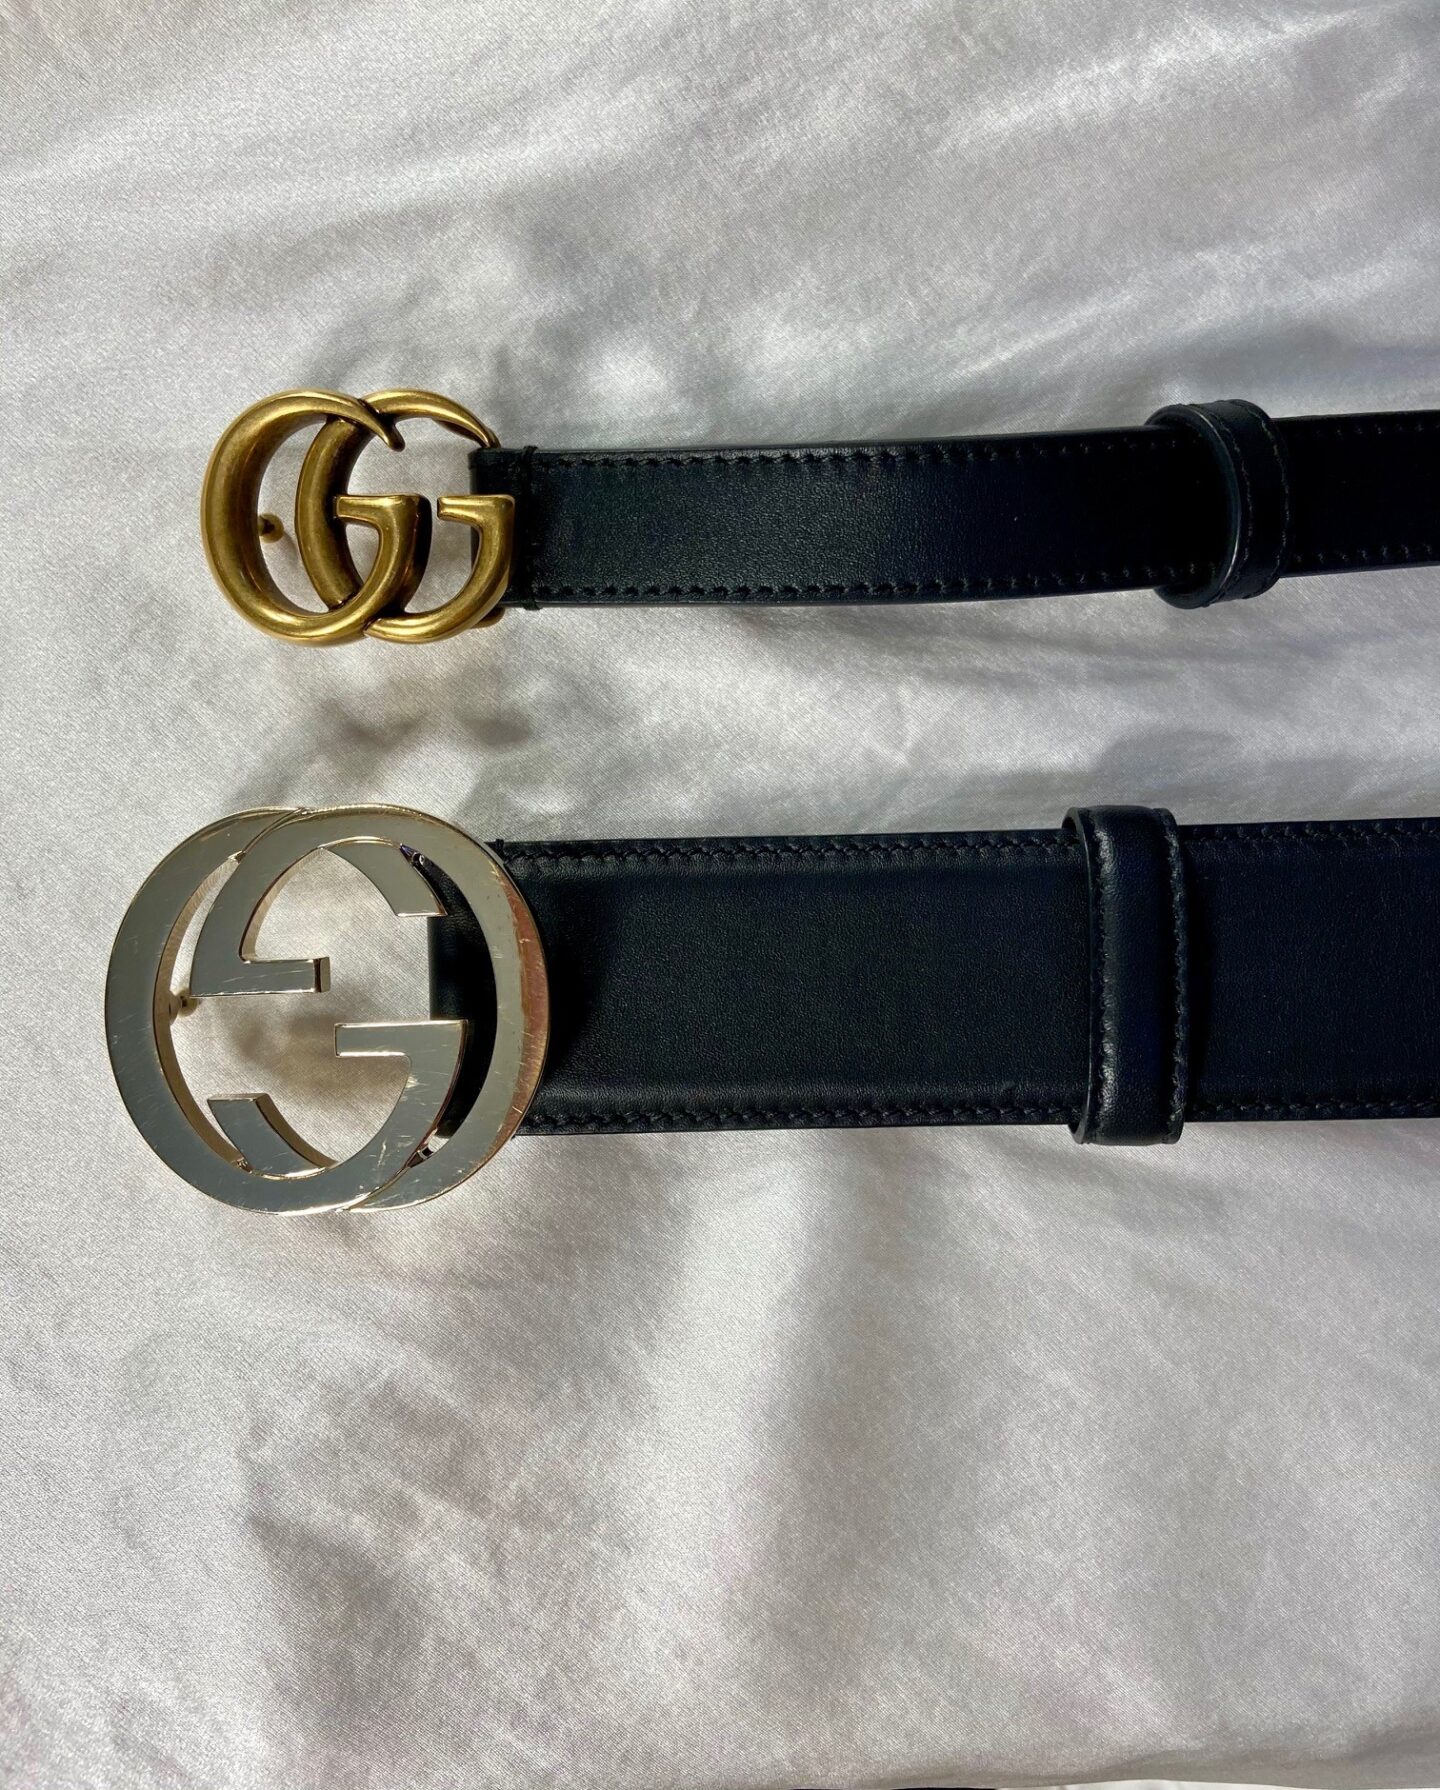 Moden Rige bønner Review: Is the Gucci Belt Overrated? - Allure By Tess Fashion Blog